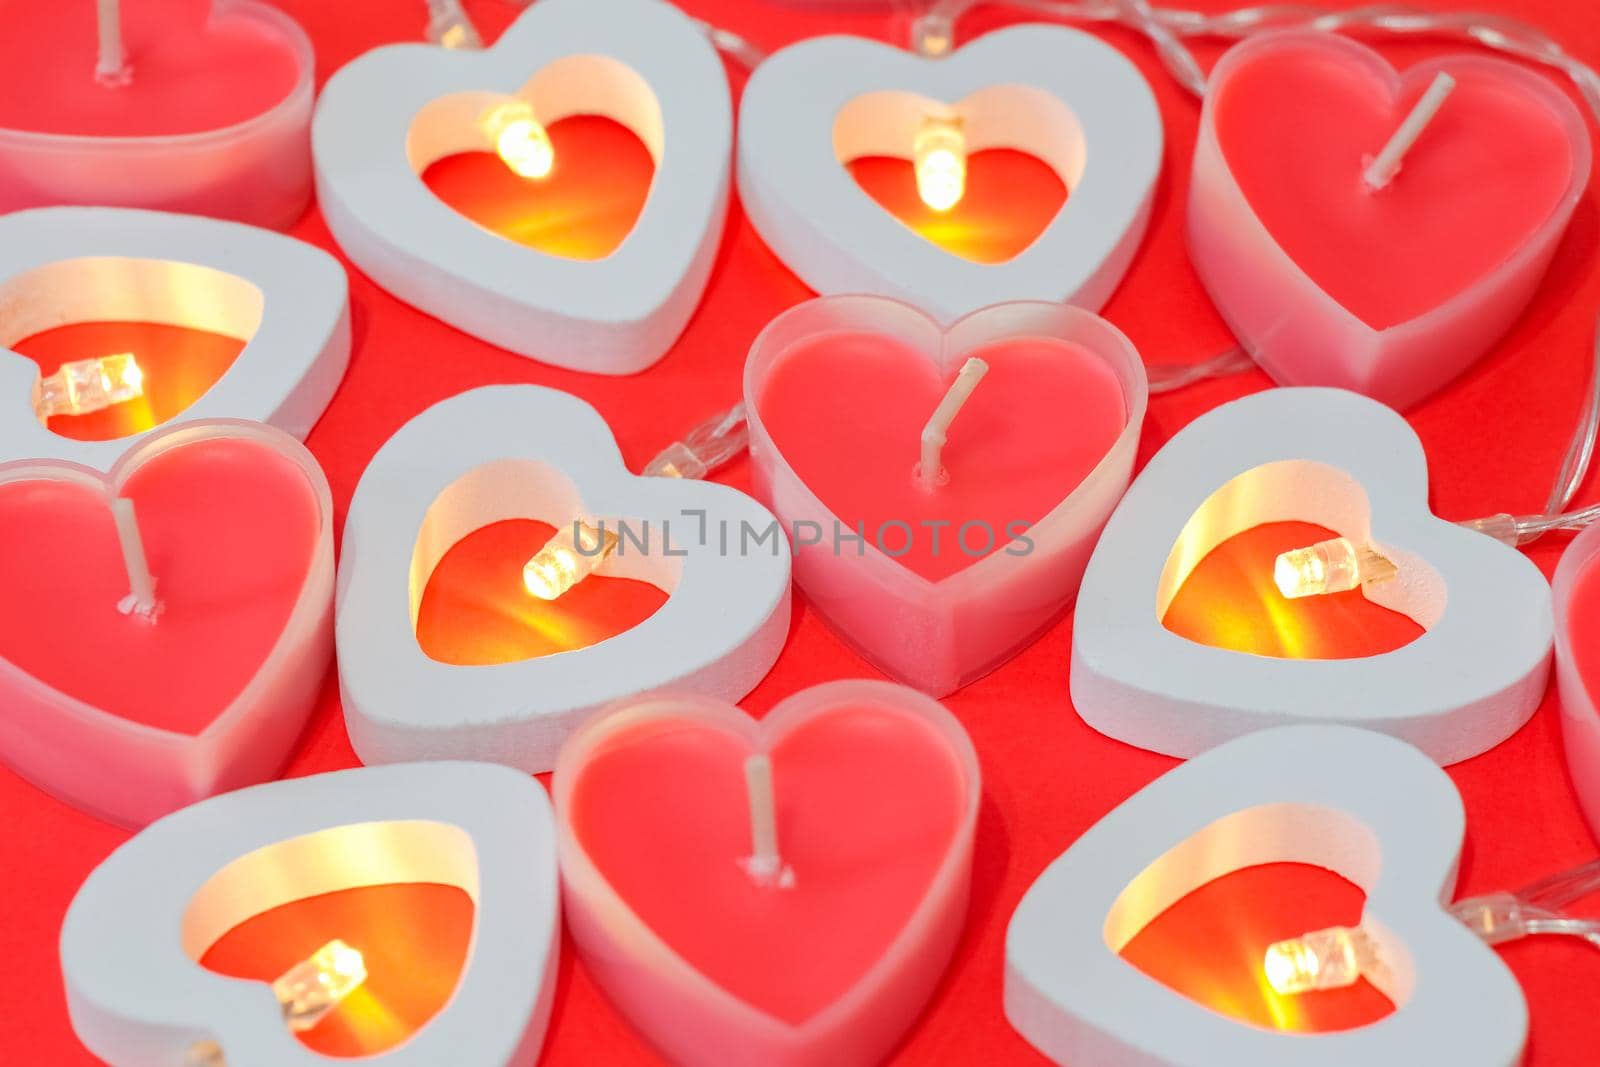 pink candles in the form of a heart on a red background for Valentine's day  by roman112007